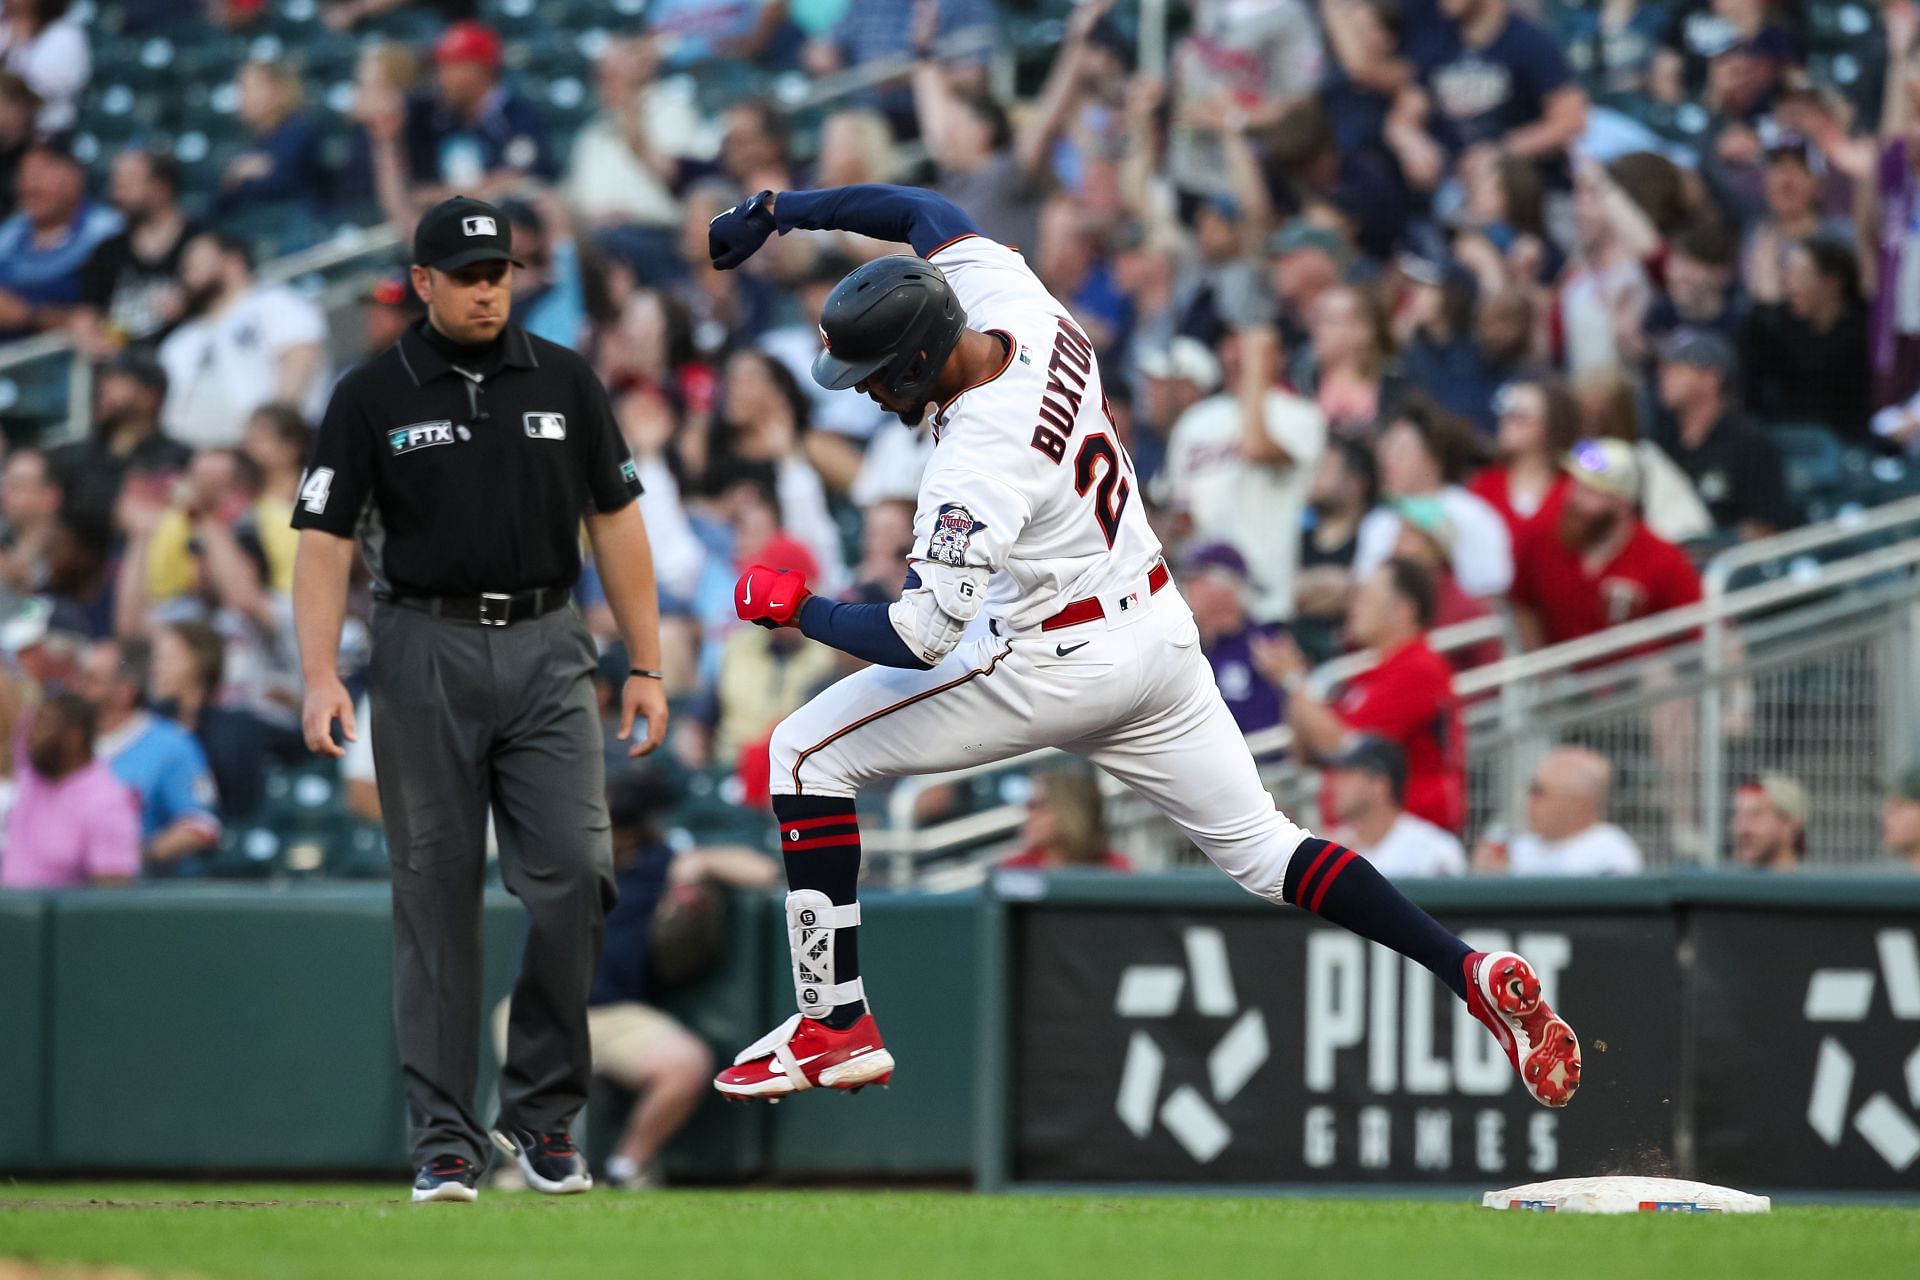 Byron Buxton of the Minnesota Twins celebrates a home run against the New York Yankees.